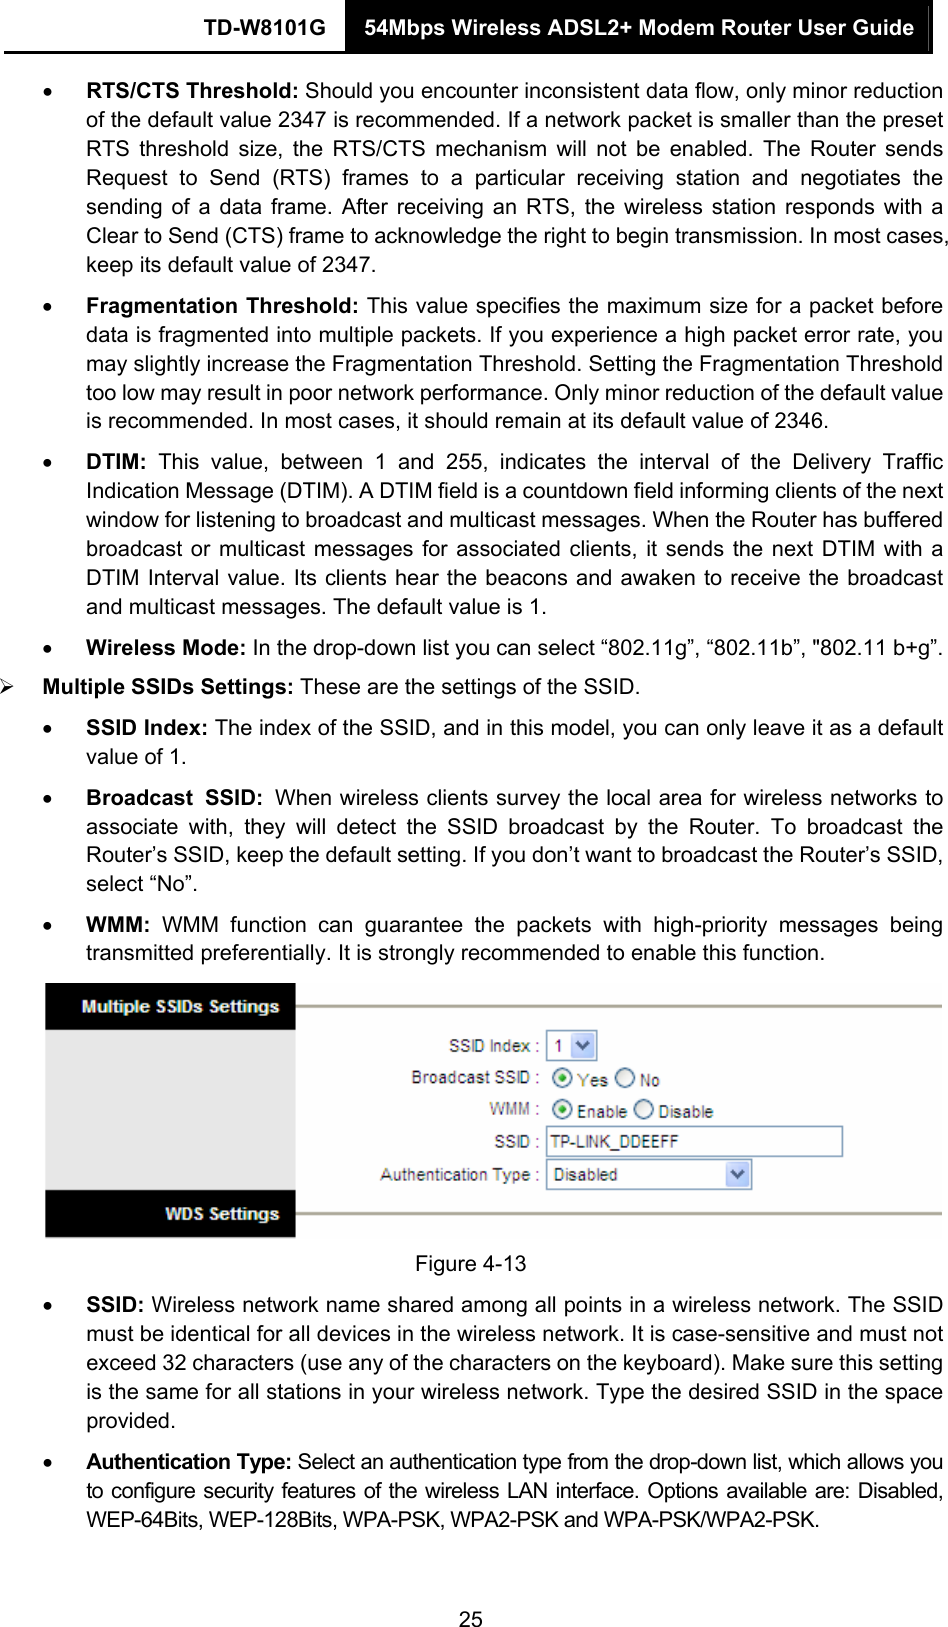 TD-W8101G  54Mbps Wireless ADSL2+ Modem Router User Guide  25• RTS/CTS Threshold: Should you encounter inconsistent data flow, only minor reduction of the default value 2347 is recommended. If a network packet is smaller than the preset RTS threshold size, the RTS/CTS mechanism will not be enabled. The Router sends Request to Send (RTS) frames to a particular receiving station and negotiates the sending of a data frame. After receiving an RTS, the wireless station responds with a Clear to Send (CTS) frame to acknowledge the right to begin transmission. In most cases, keep its default value of 2347. • Fragmentation Threshold: This value specifies the maximum size for a packet before data is fragmented into multiple packets. If you experience a high packet error rate, you may slightly increase the Fragmentation Threshold. Setting the Fragmentation Threshold too low may result in poor network performance. Only minor reduction of the default value is recommended. In most cases, it should remain at its default value of 2346. • DTIM:  This value, between 1 and 255, indicates the interval of the Delivery Traffic Indication Message (DTIM). A DTIM field is a countdown field informing clients of the next window for listening to broadcast and multicast messages. When the Router has buffered broadcast or multicast messages for associated clients, it sends the next DTIM with a DTIM Interval value. Its clients hear the beacons and awaken to receive the broadcast and multicast messages. The default value is 1. • Wireless Mode: In the drop-down list you can select “802.11g”, “802.11b”, &quot;802.11 b+g”. ¾ Multiple SSIDs Settings: These are the settings of the SSID. • SSID Index: The index of the SSID, and in this model, you can only leave it as a default value of 1. • Broadcast SSID: When wireless clients survey the local area for wireless networks to associate with, they will detect the SSID broadcast by the Router. To broadcast the Router’s SSID, keep the default setting. If you don’t want to broadcast the Router’s SSID, select “No”. • WMM: WMM function can guarantee the packets with high-priority messages being transmitted preferentially. It is strongly recommended to enable this function.  Figure 4-13 • SSID: Wireless network name shared among all points in a wireless network. The SSID must be identical for all devices in the wireless network. It is case-sensitive and must not exceed 32 characters (use any of the characters on the keyboard). Make sure this setting is the same for all stations in your wireless network. Type the desired SSID in the space provided. • Authentication Type: Select an authentication type from the drop-down list, which allows you to configure security features of the wireless LAN interface. Options available are: Disabled, WEP-64Bits, WEP-128Bits, WPA-PSK, WPA2-PSK and WPA-PSK/WPA2-PSK.   